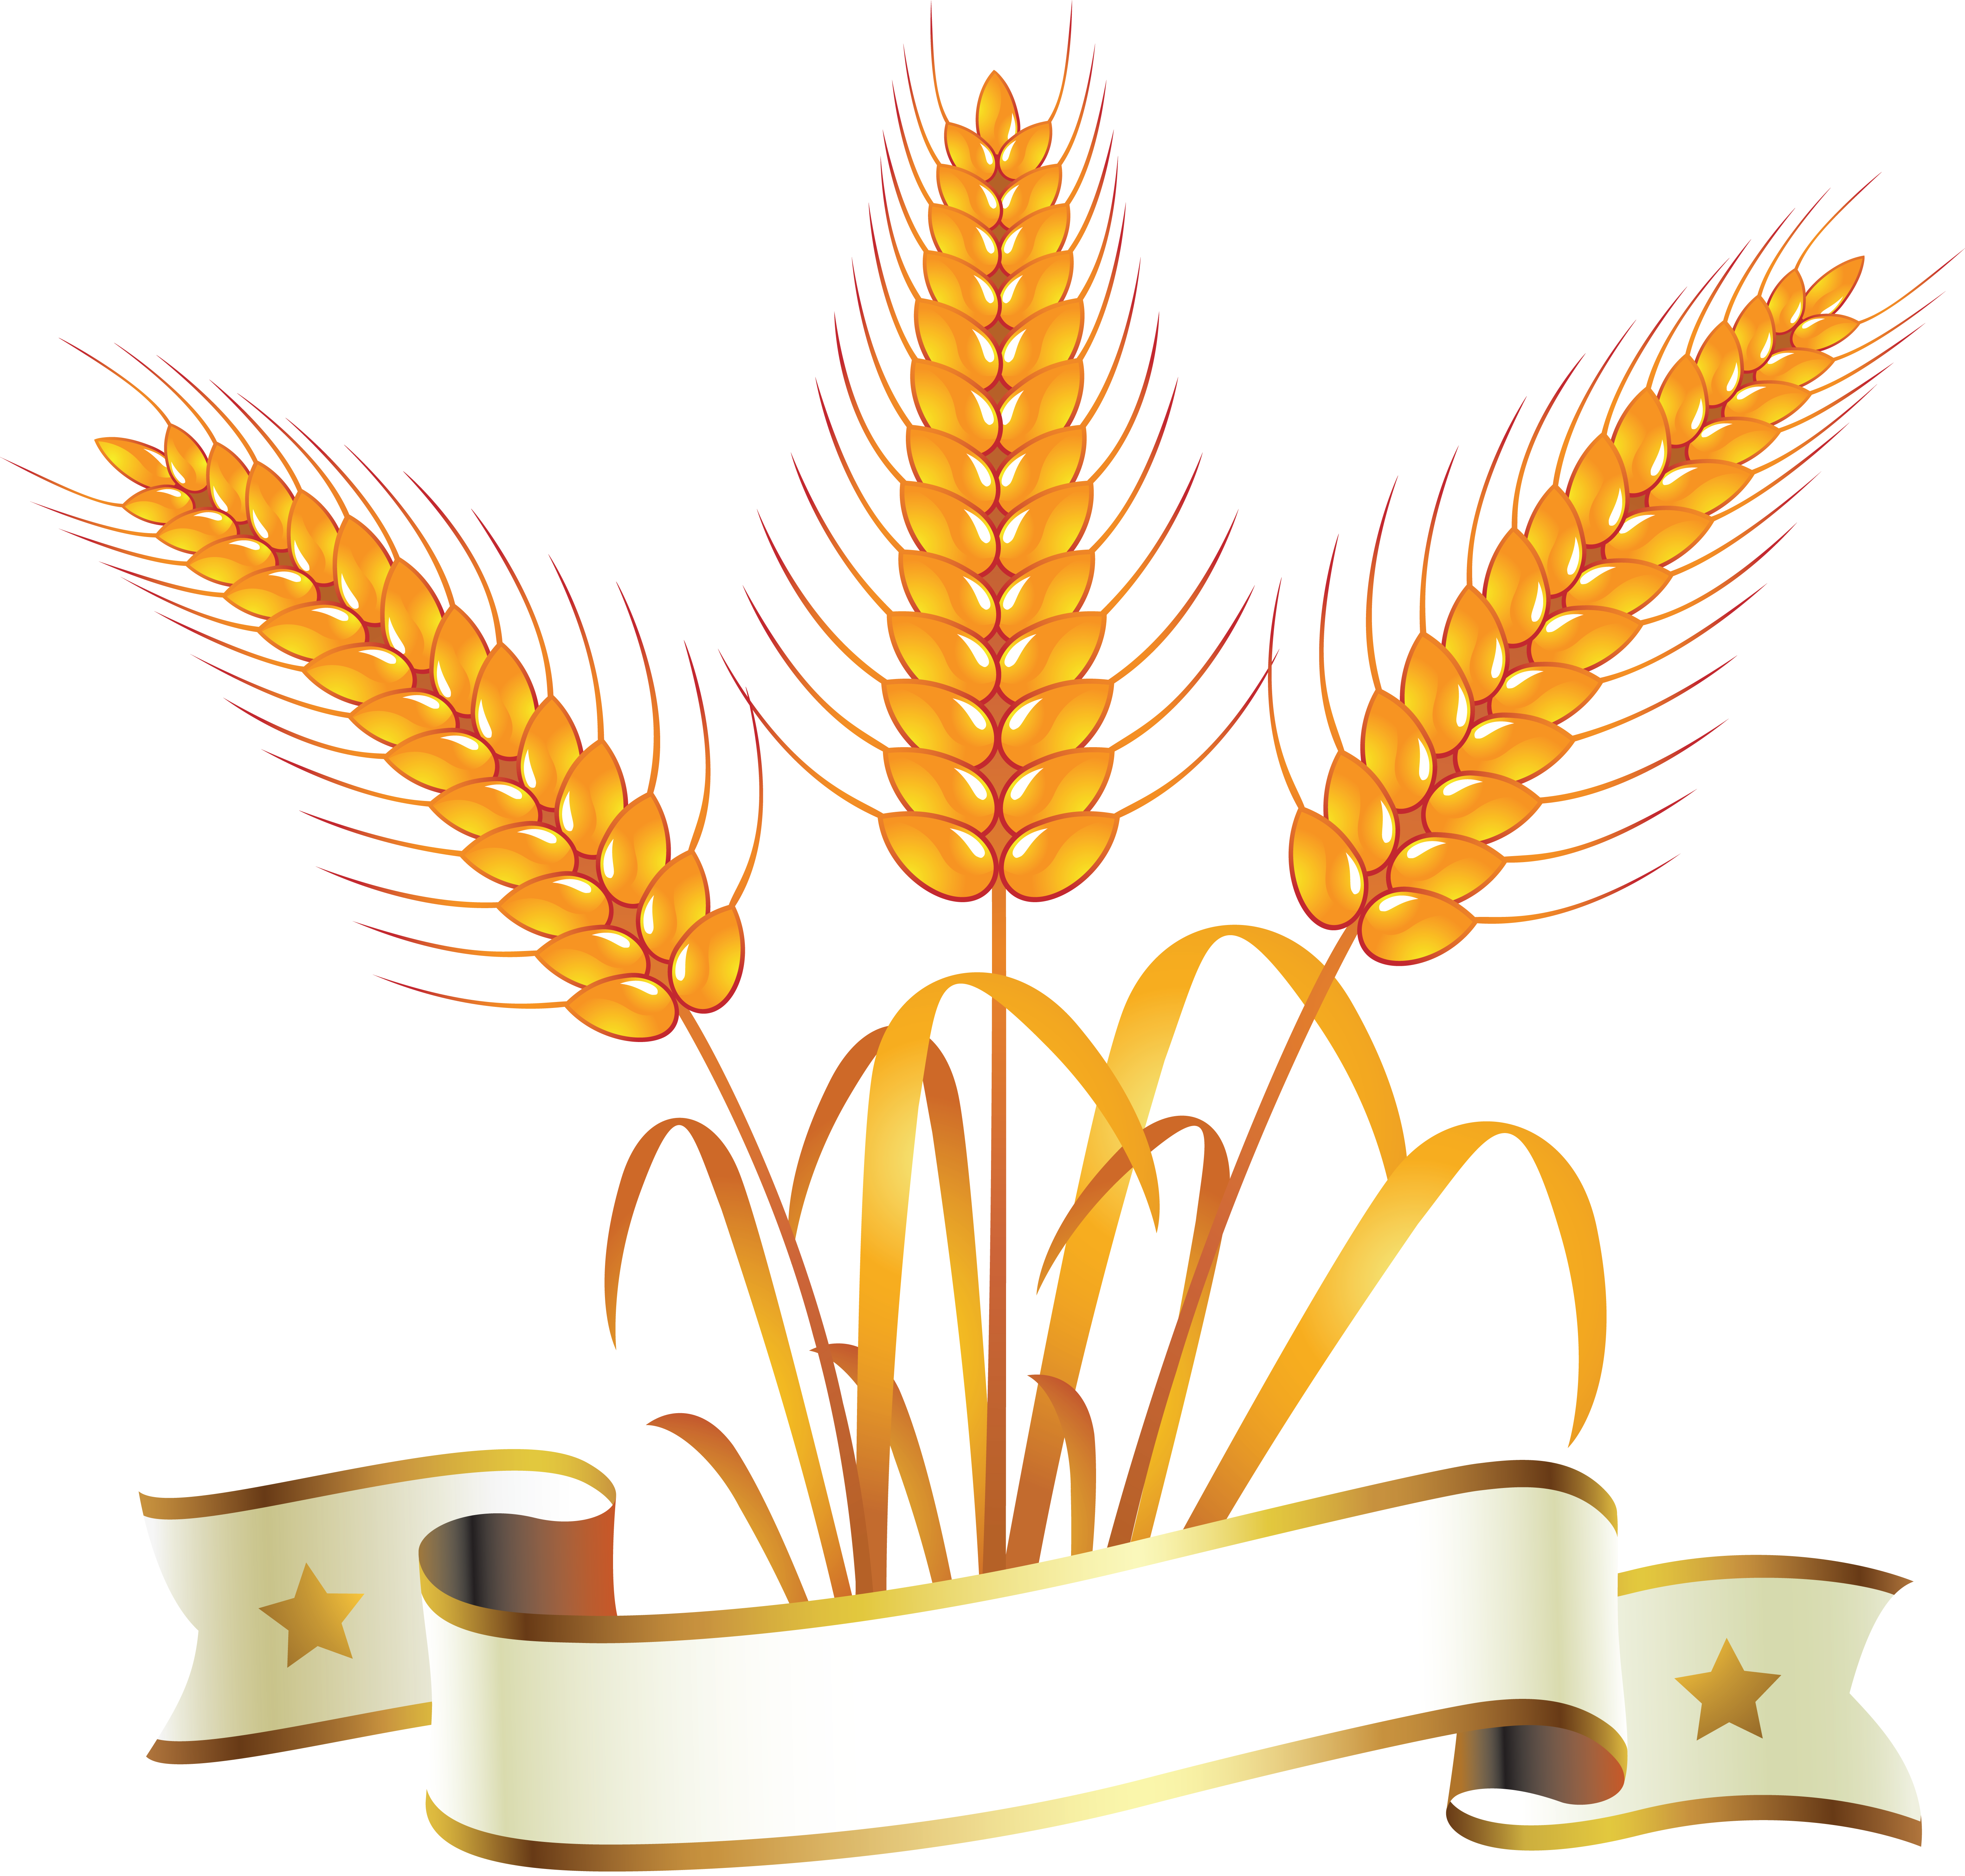 Grains clipart wheat stem. Png image purepng free